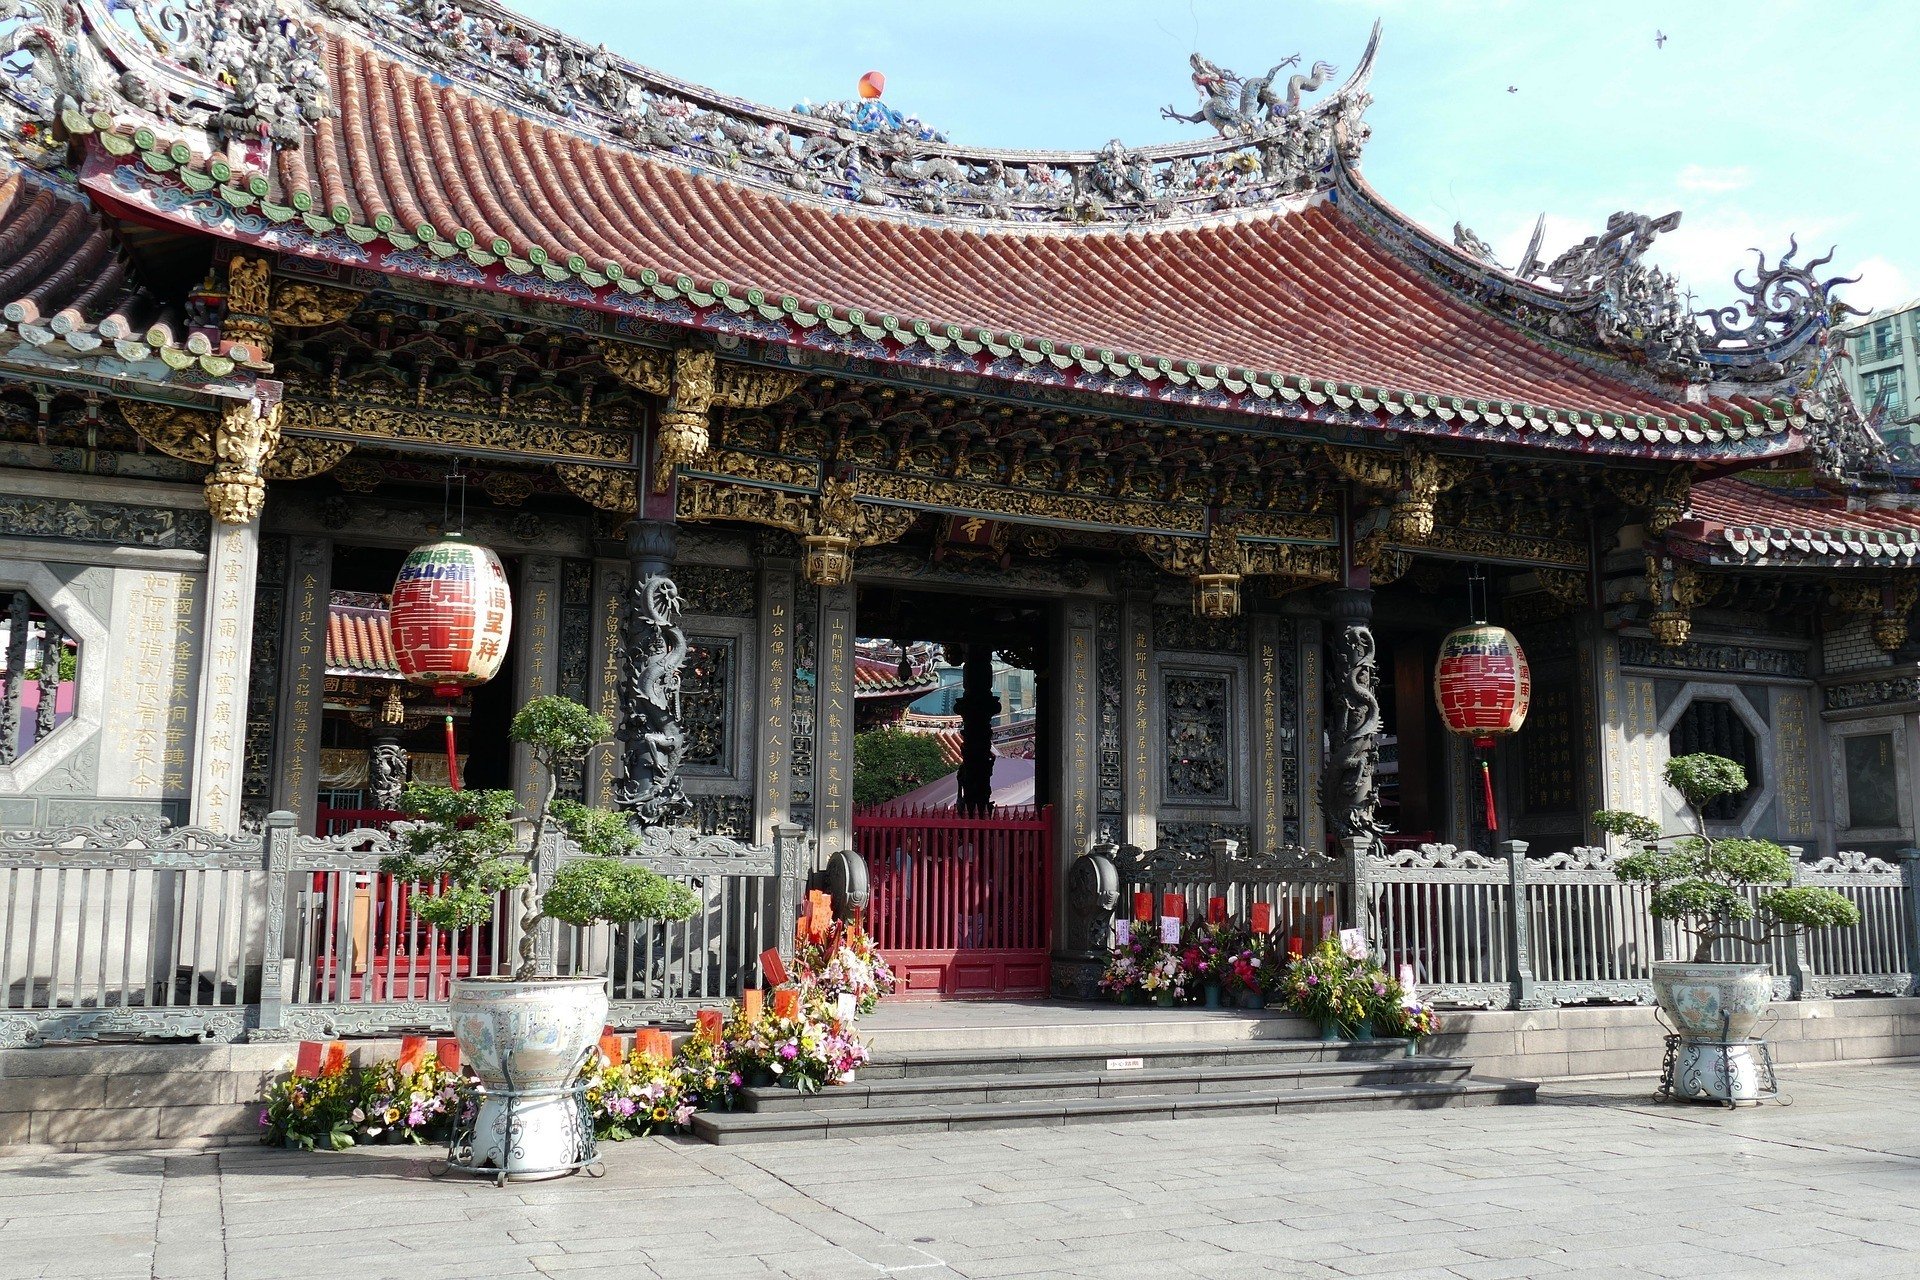 Touring temples while followinf a Taipei itinerary